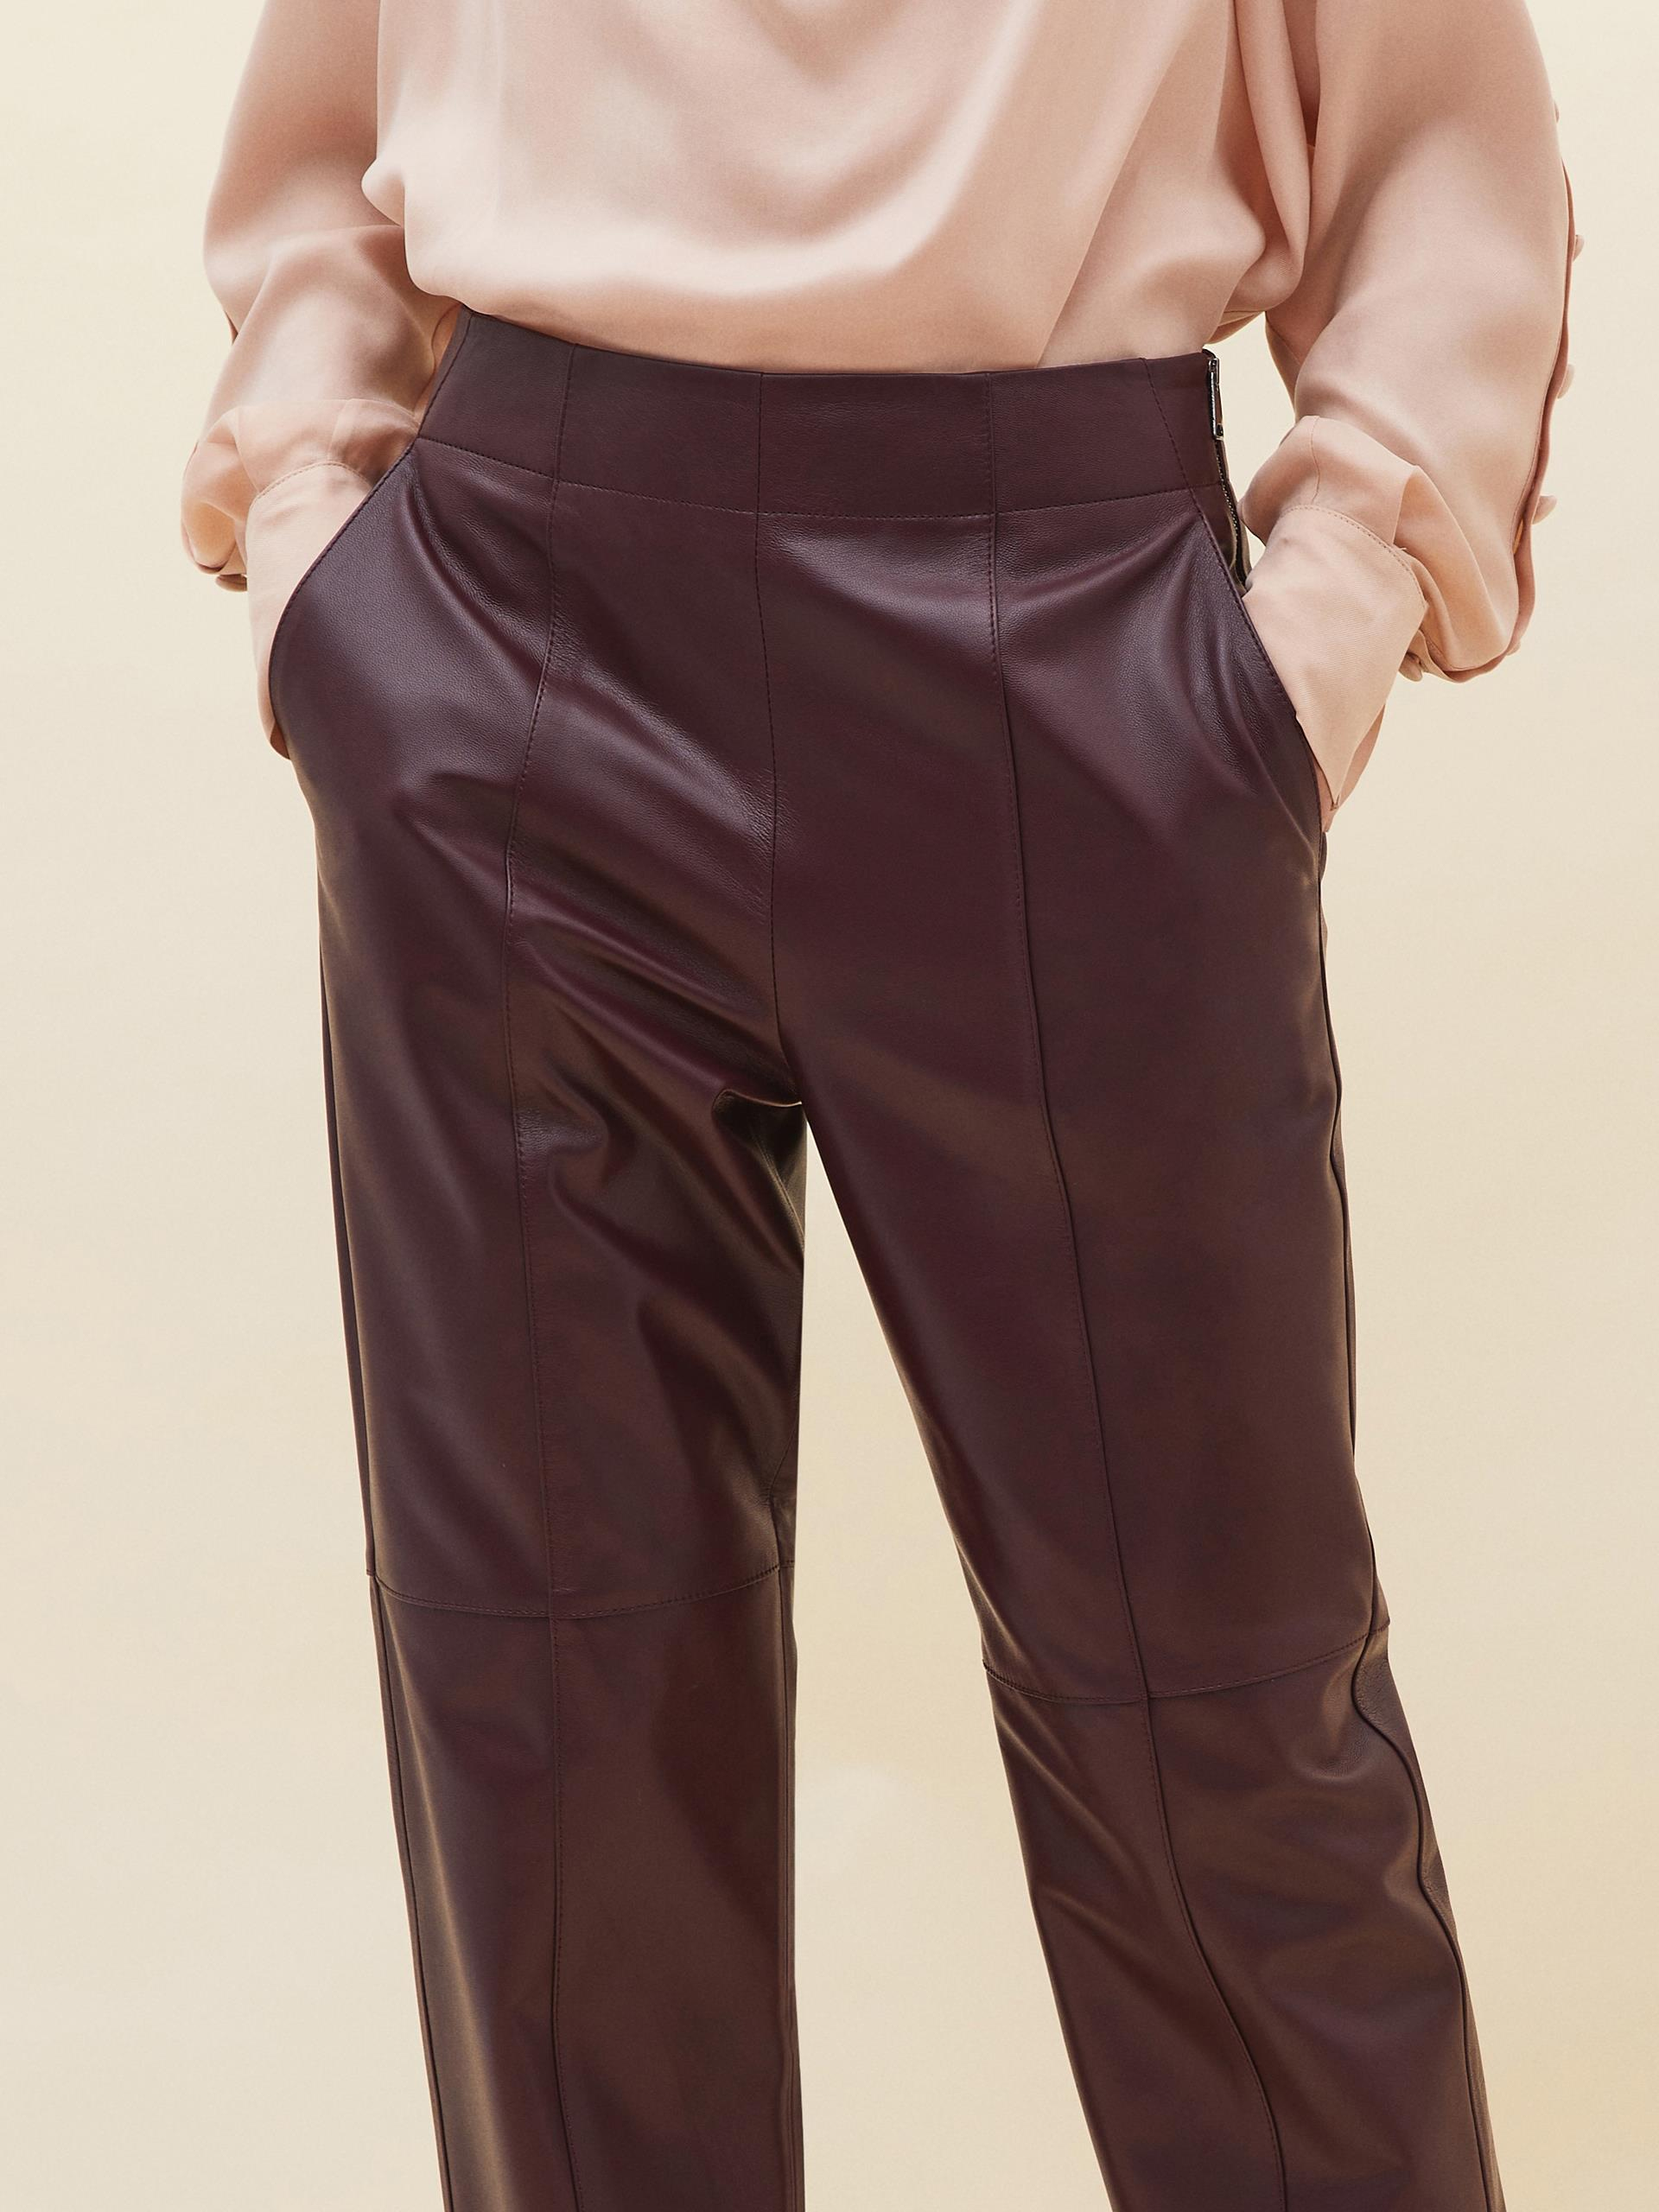 Burgundy Leather Trousers